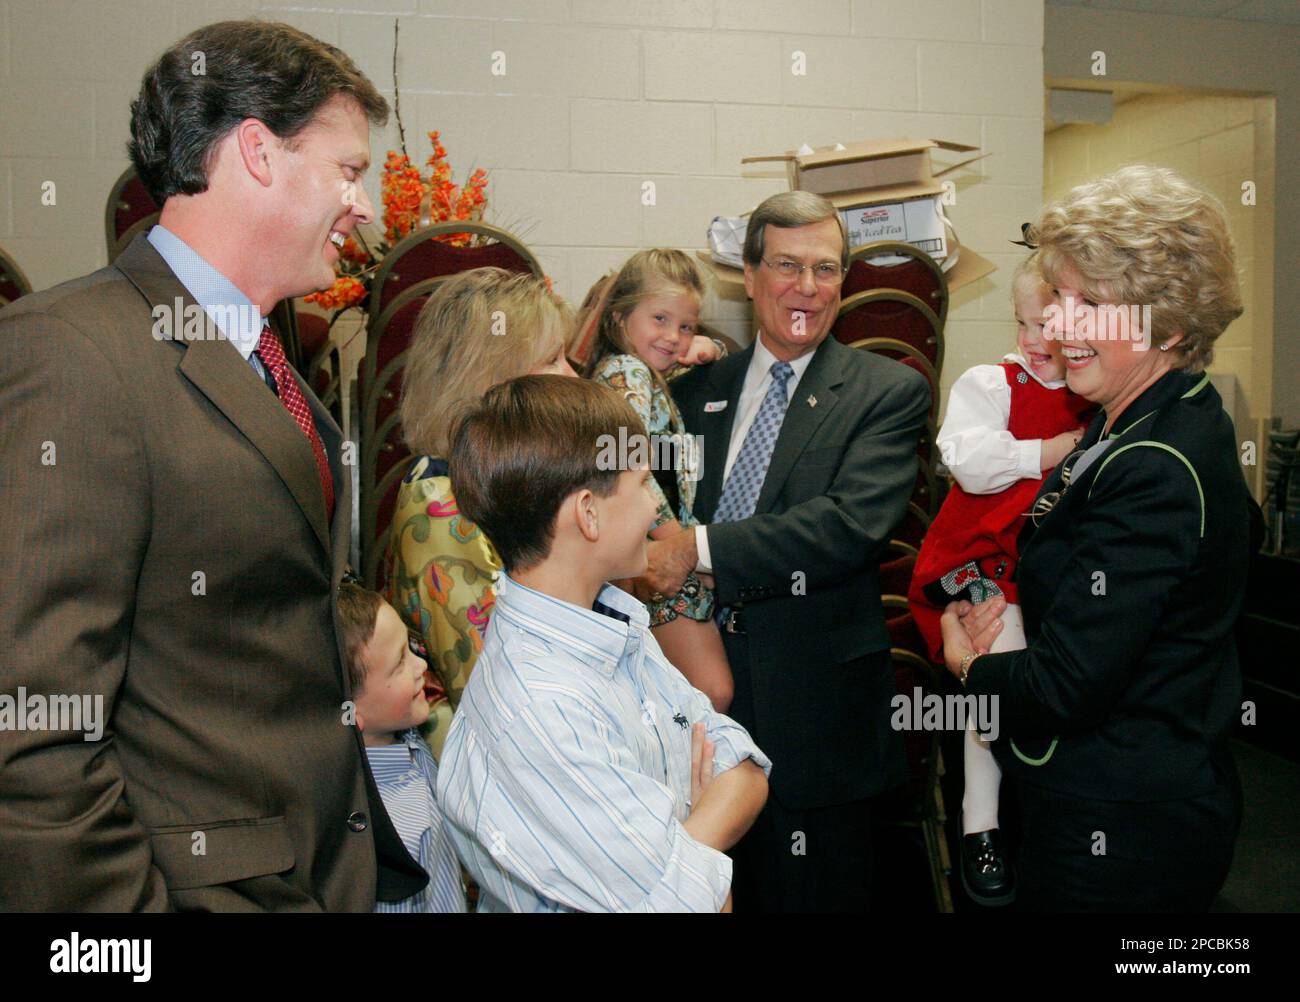 U.S. Sen. Trent Lott, R-Miss., center, his wife Tricia, right, and ...